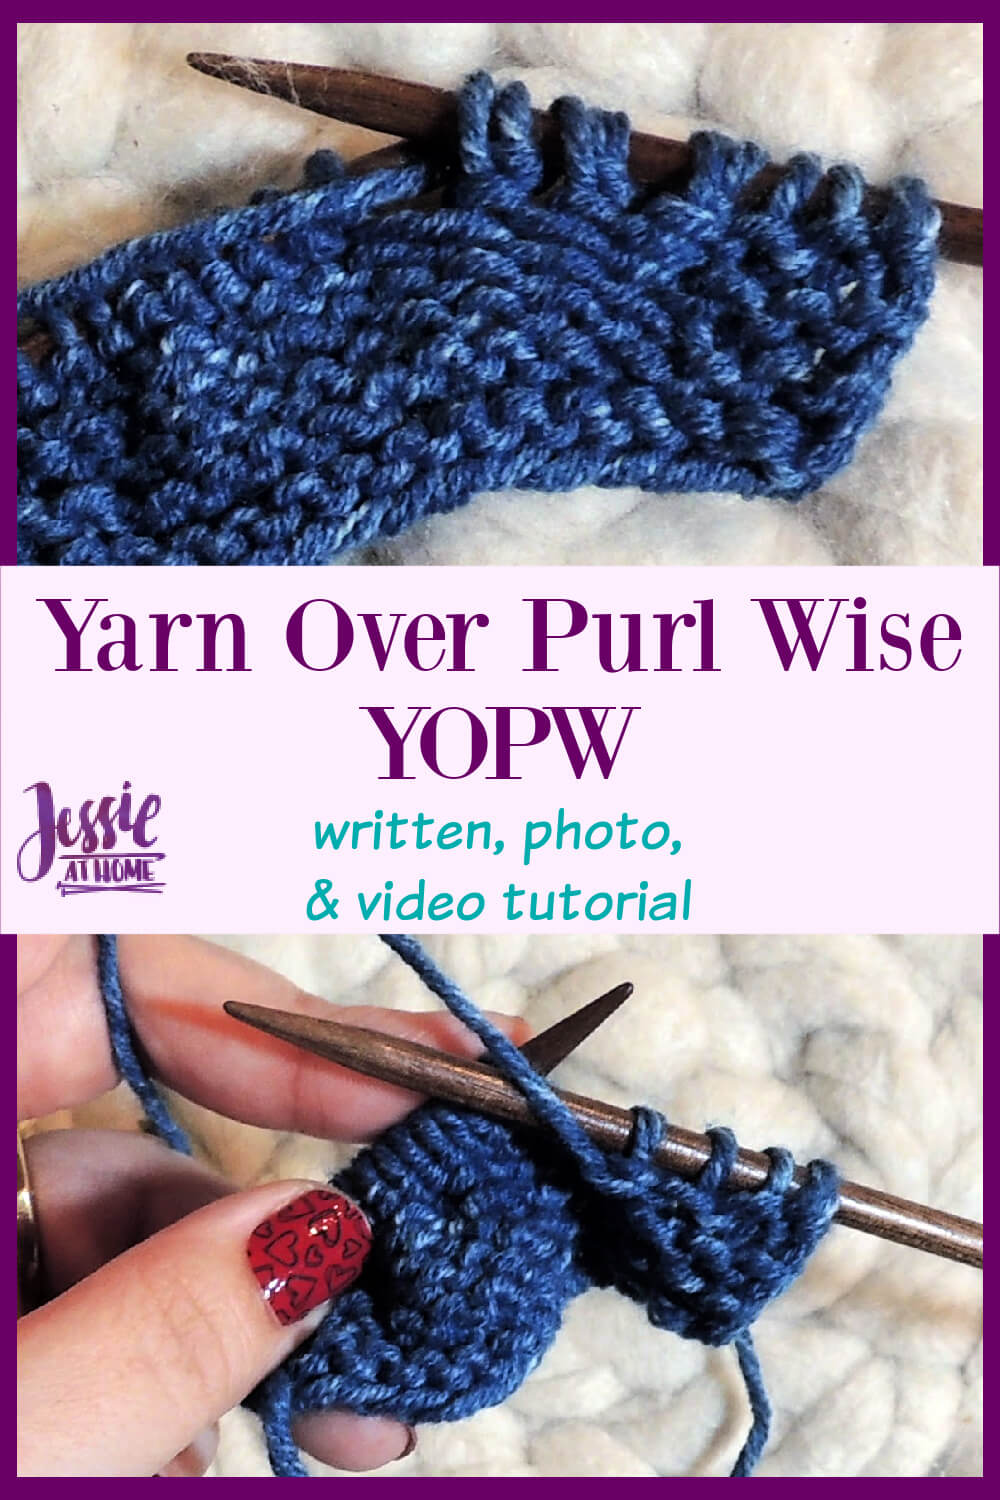 Yarn Over Purl Wise